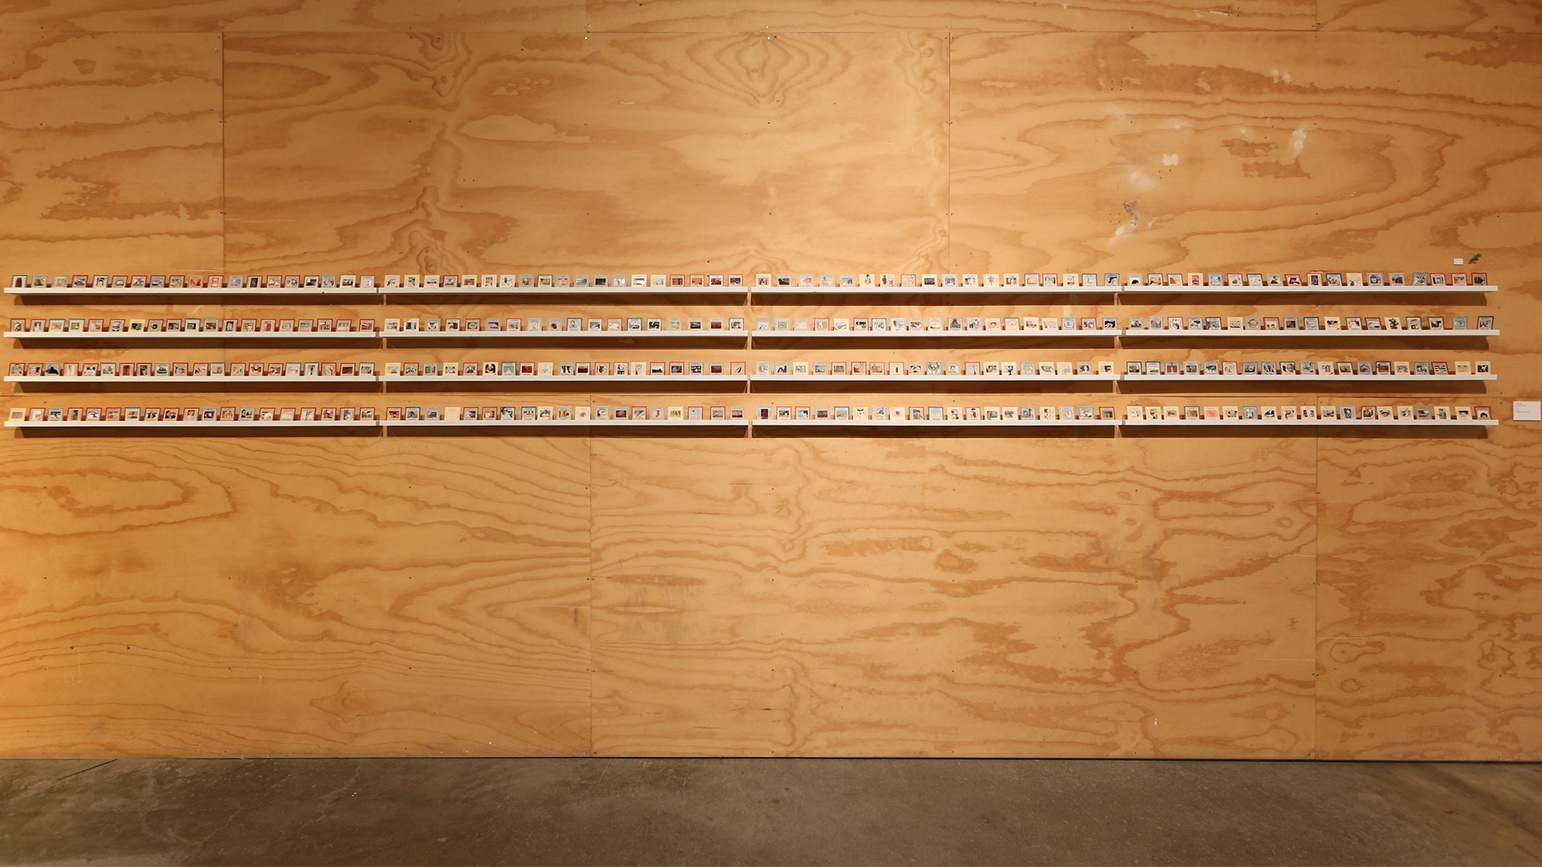 Installation view of "300 non-instagrams" showing four long shelves with 300 collages the size of film slides